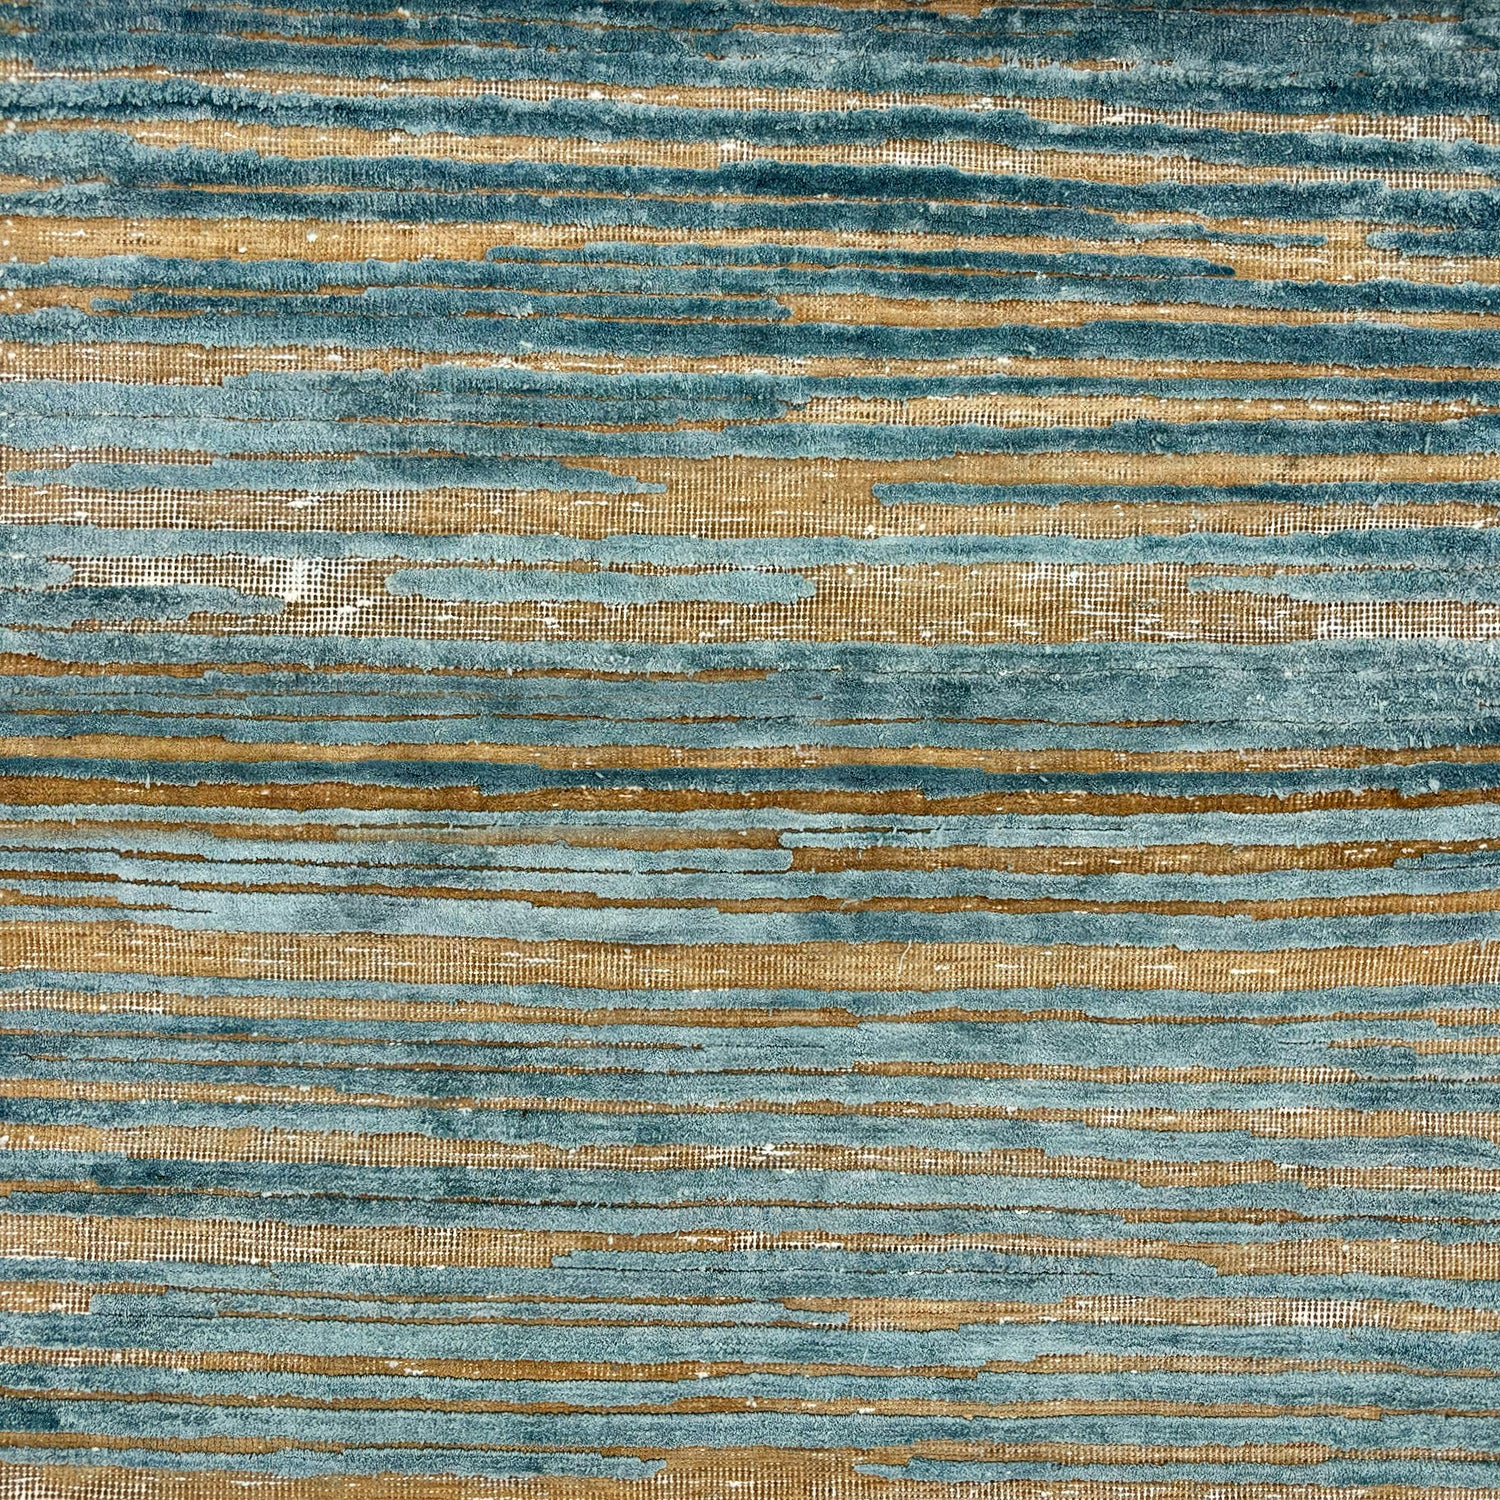 Detail of a wool rug with a textural strié pattern in teal and brown